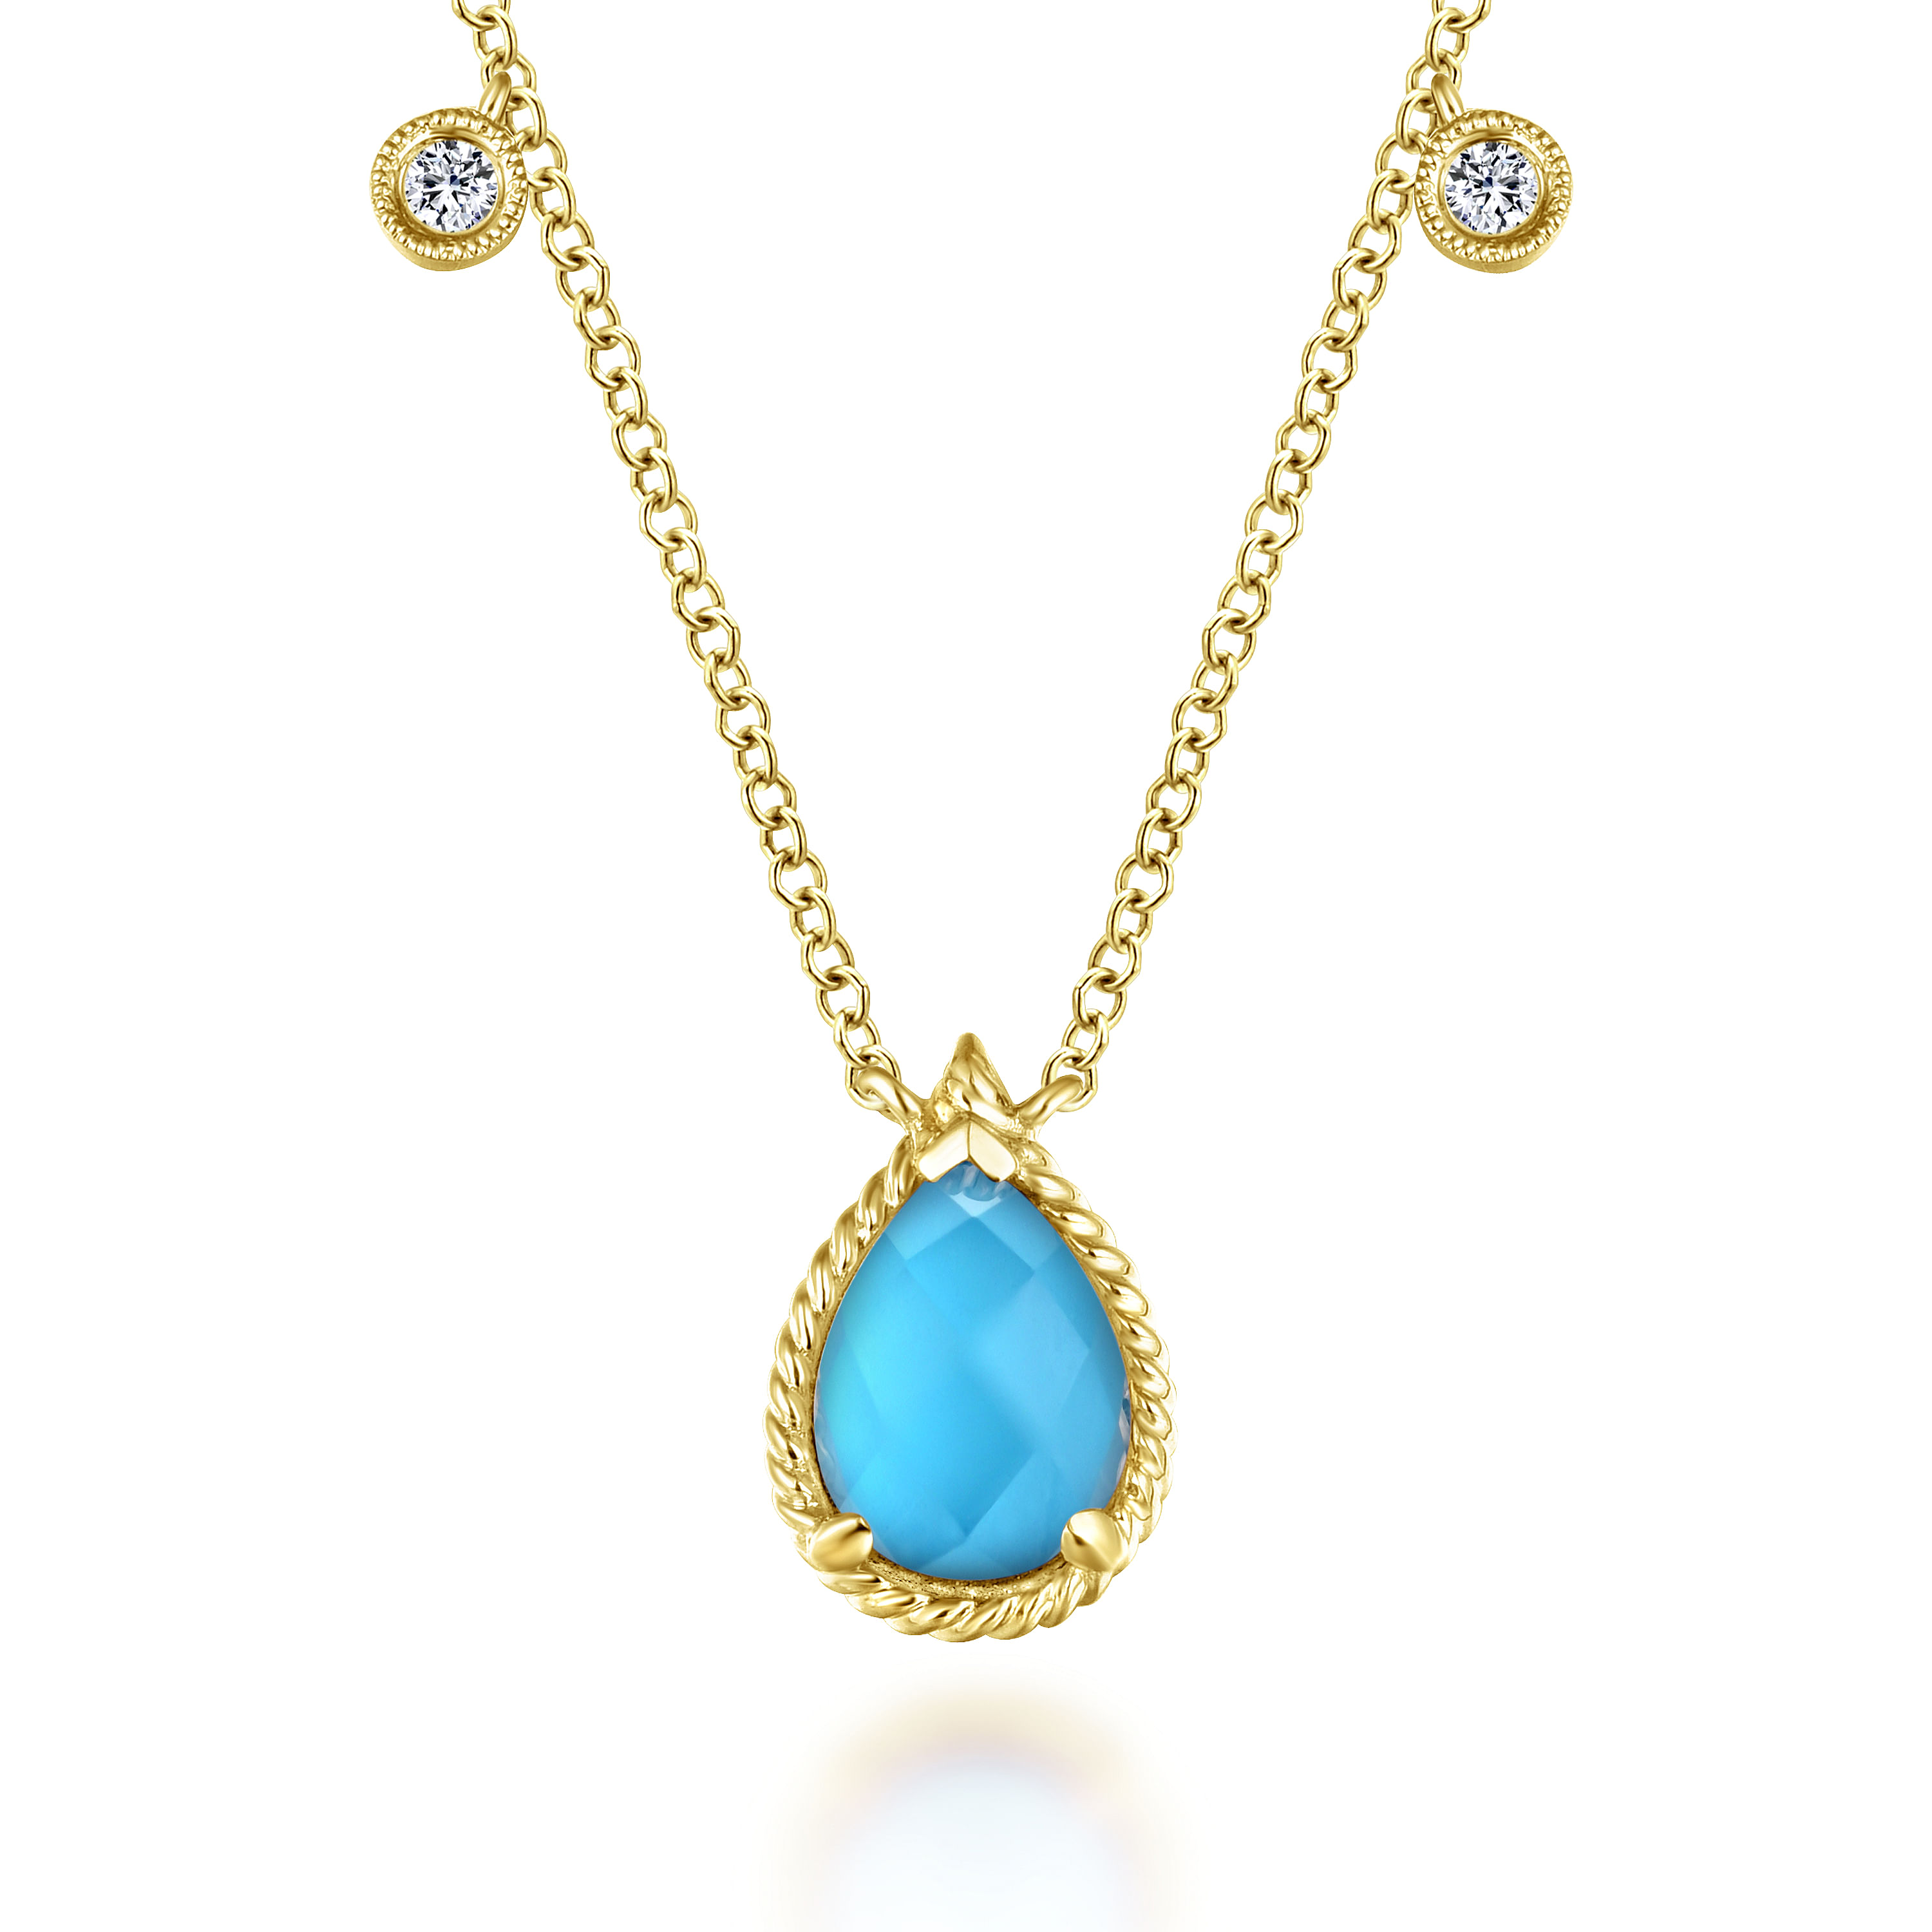 14K Yellow Gold Teardrop Rock Crystal/Turquoise Pendant Necklace with Diamond Accents